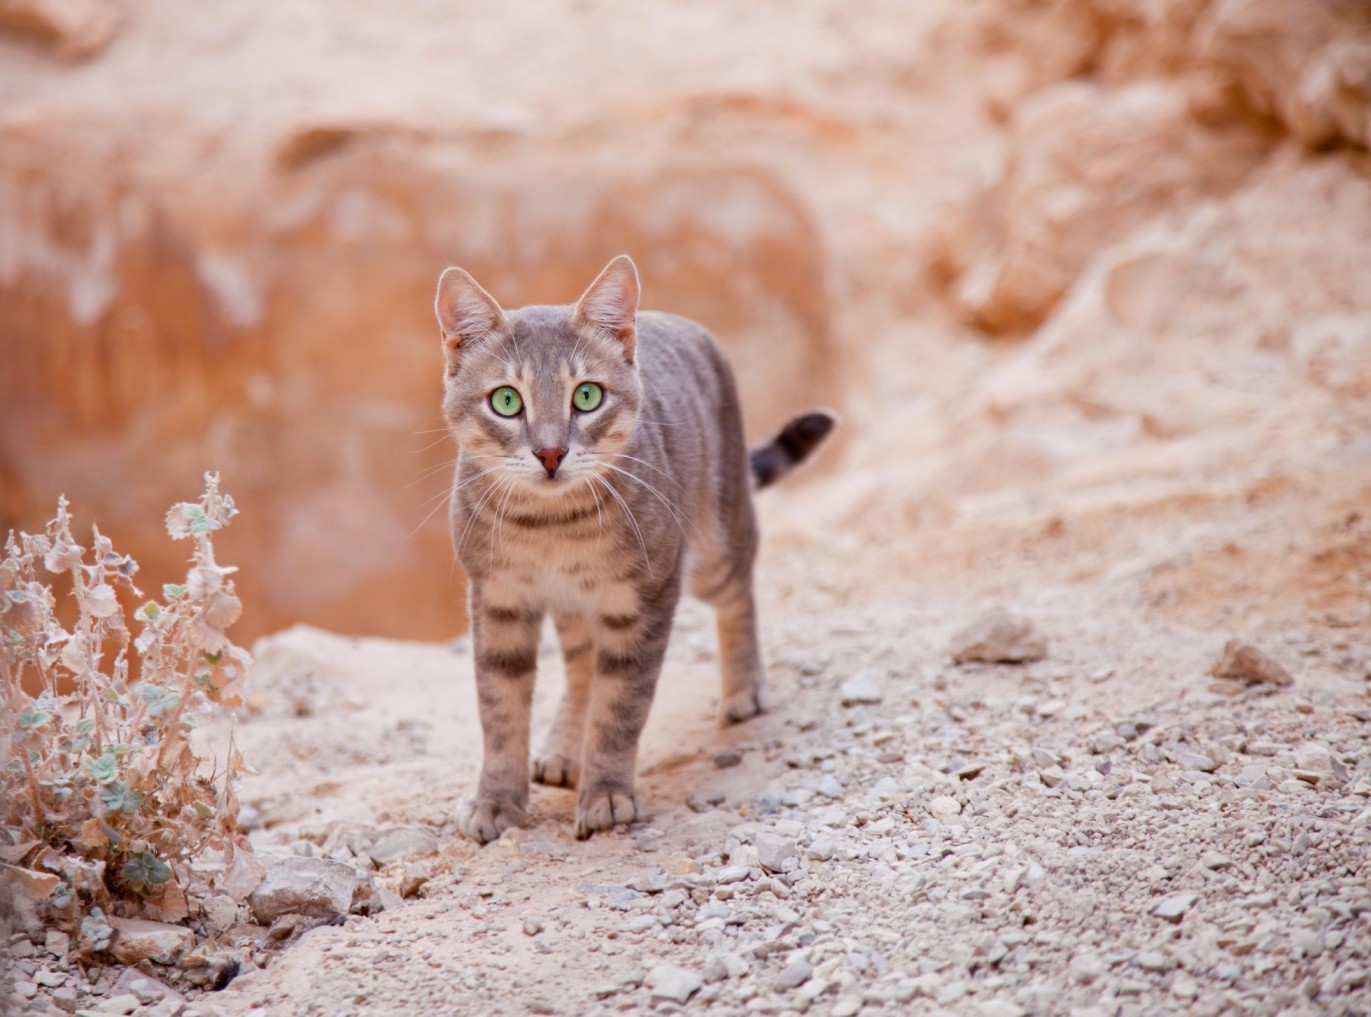 A cat standing in a dry, desert-like area